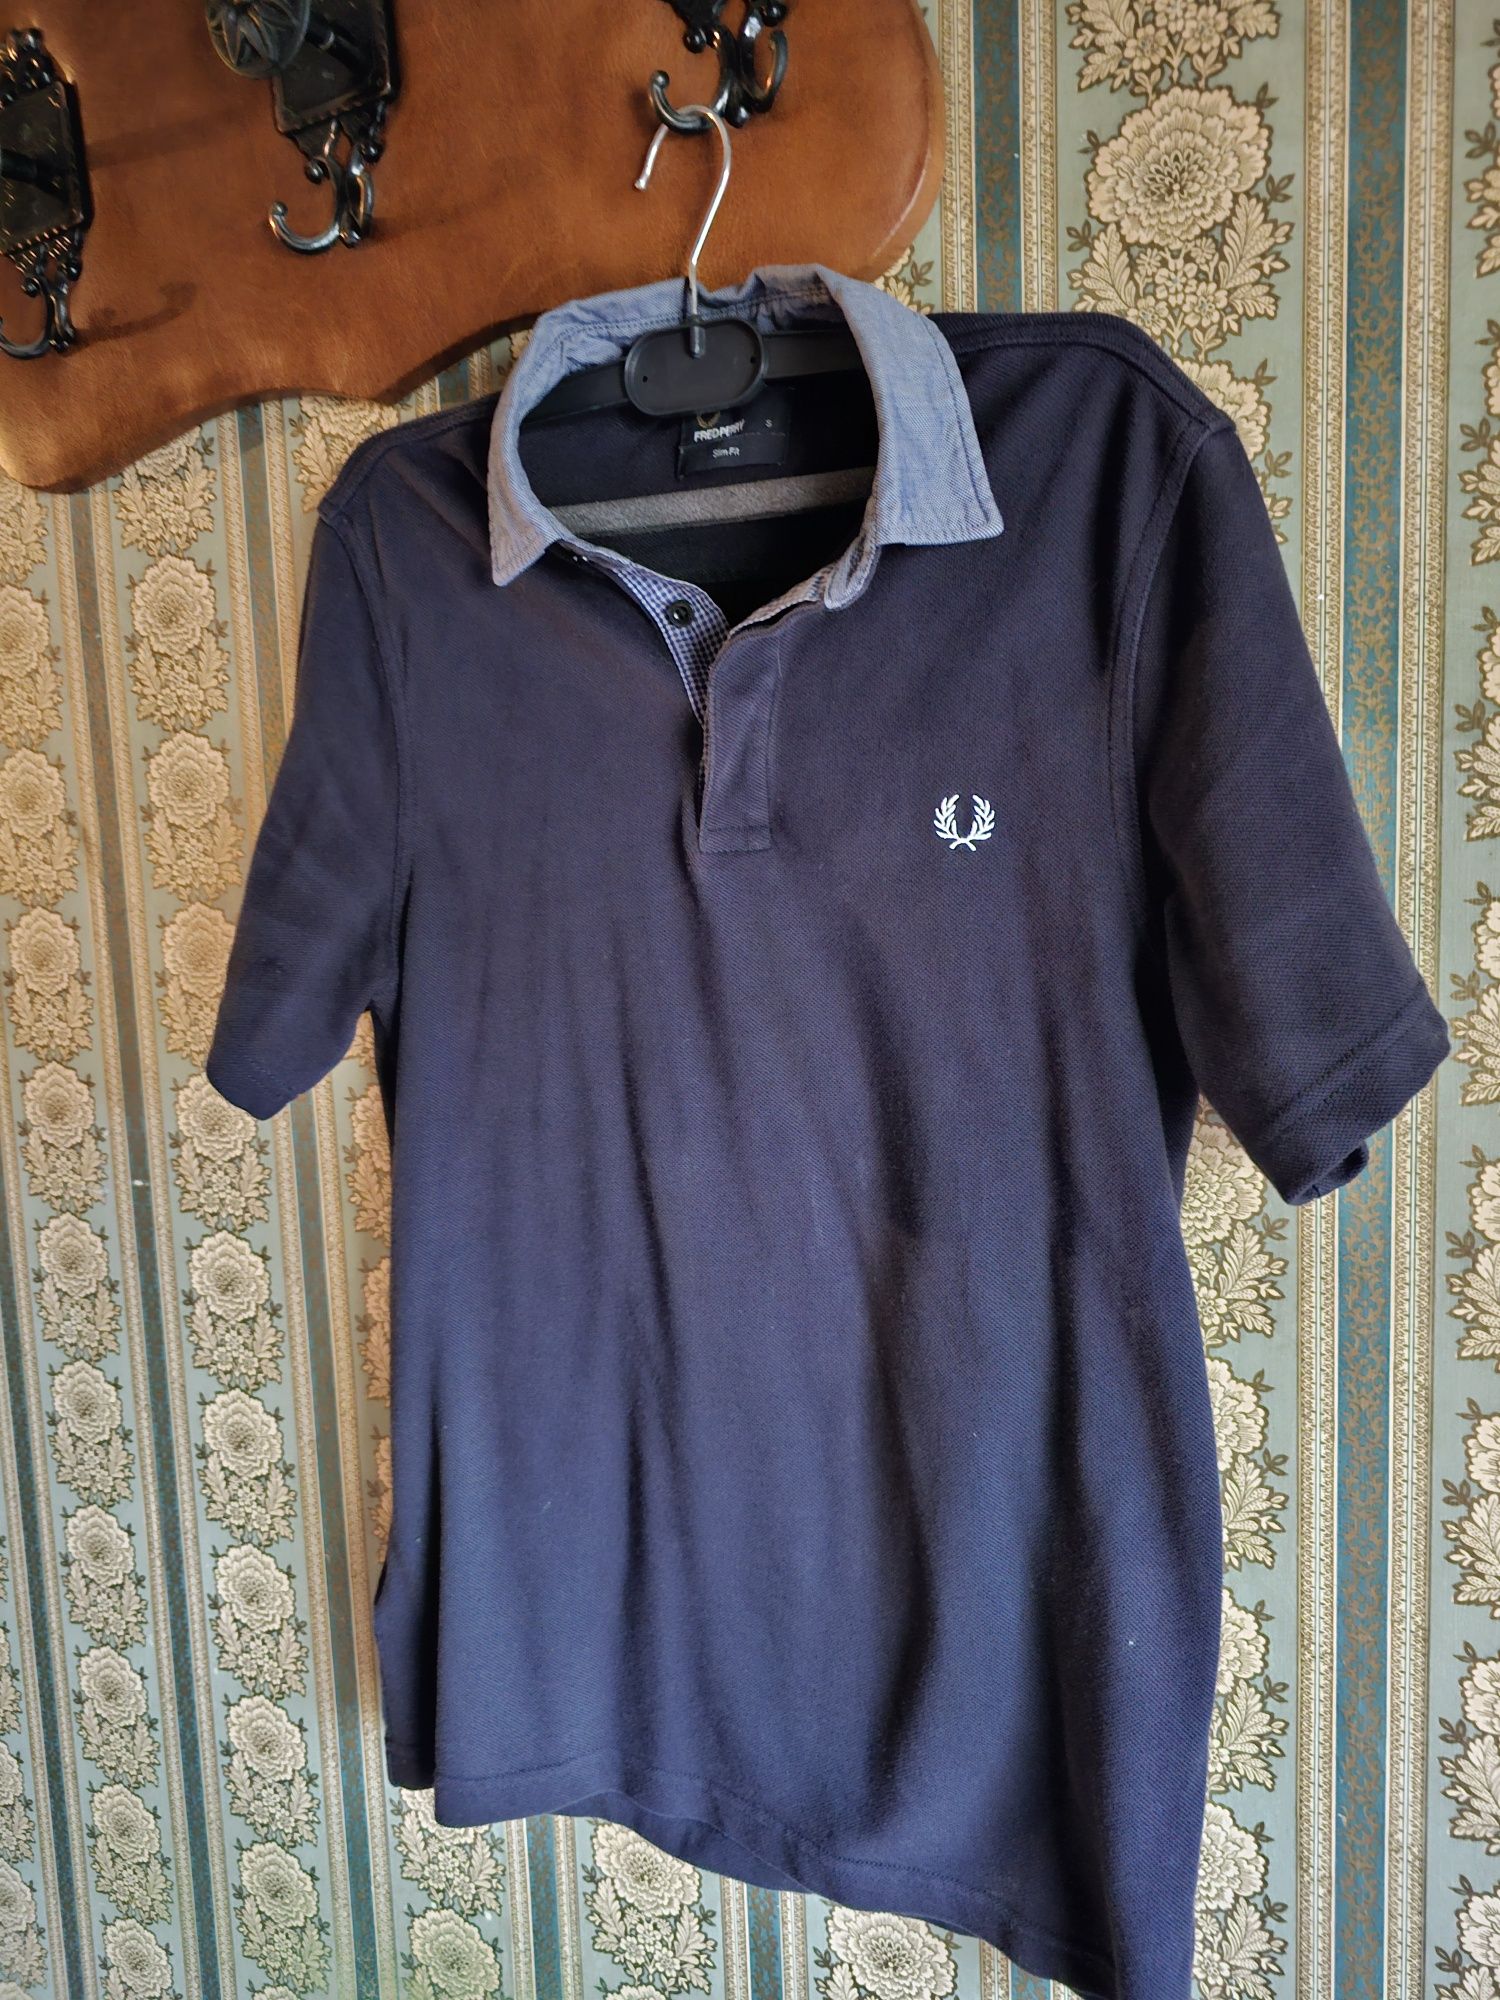 2 polos - lacoste e fred perry